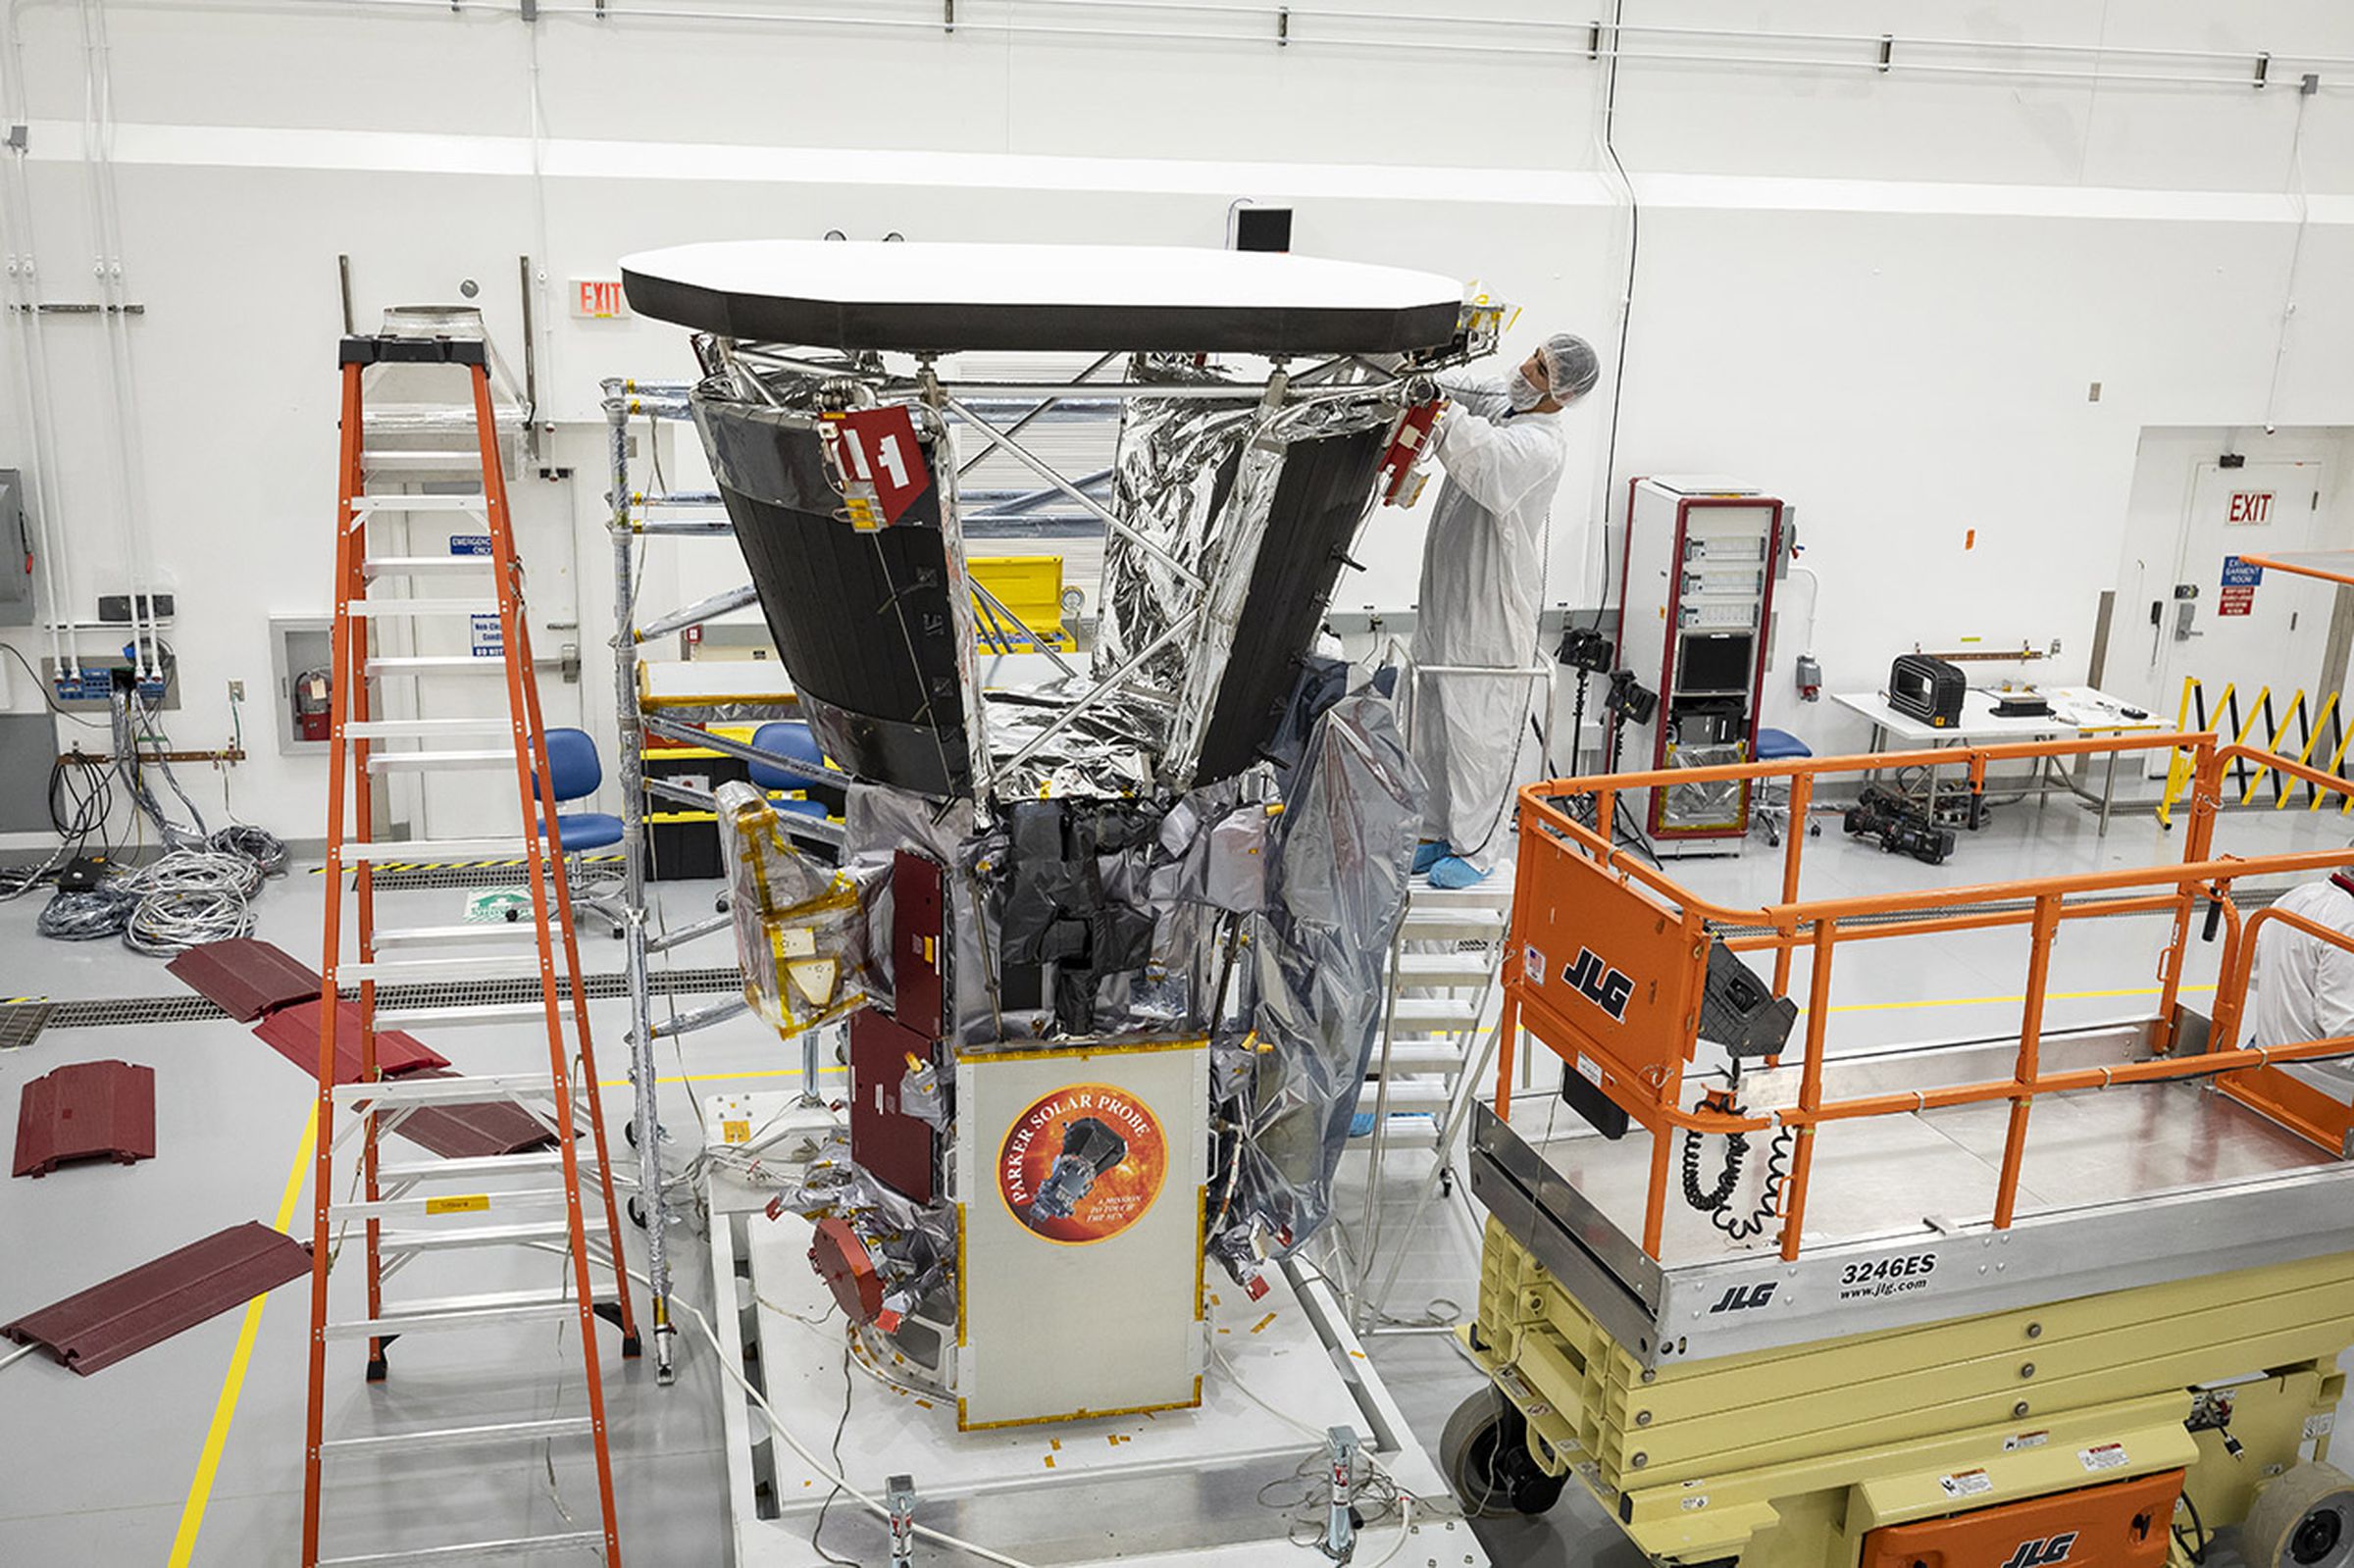 The Parker Solar Probe with its white heat shield mounted on top.